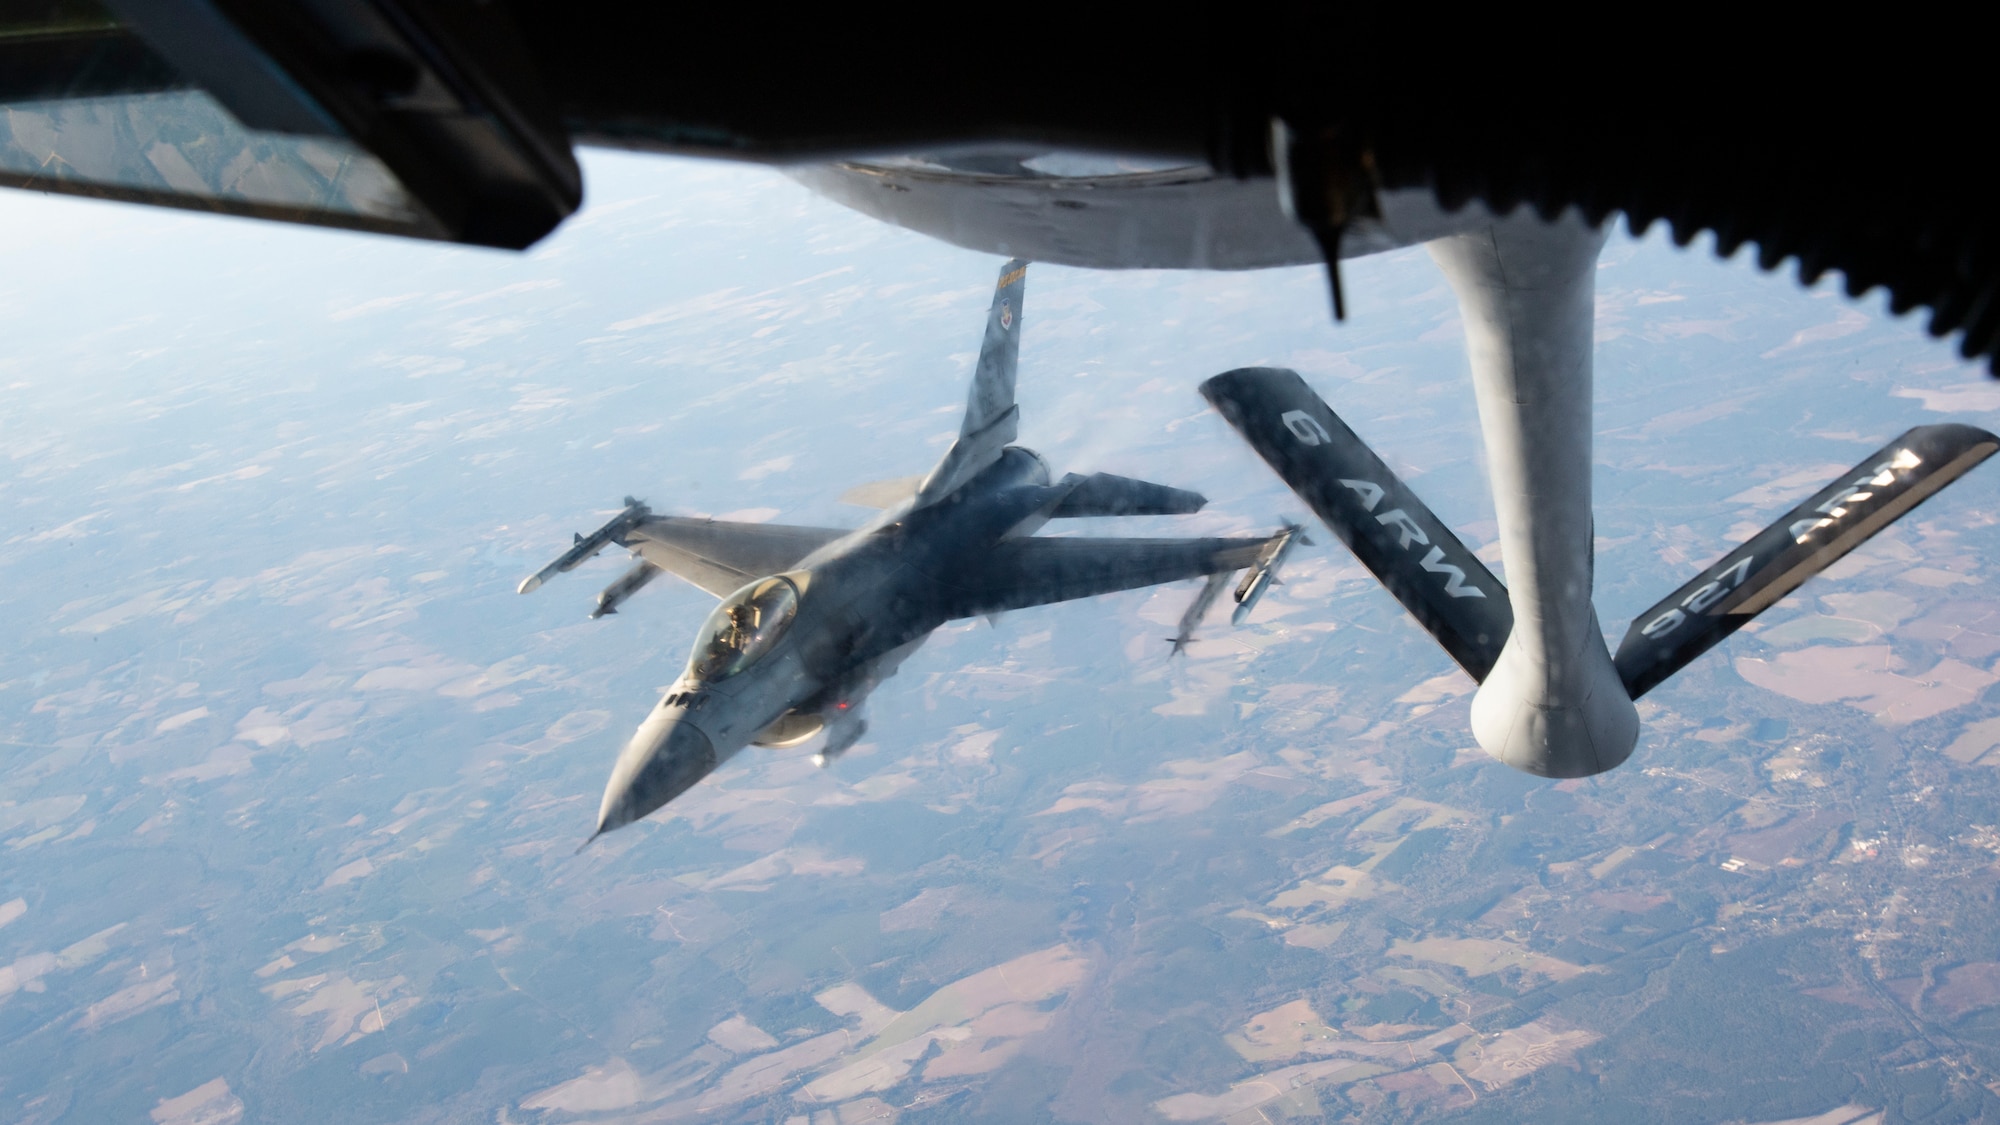 An F-16 Fighting Falcon aircraft assigned to Shaw Air Force Base (AFB), South Carolina, descends after receiving air refueling support from a KC-135 Stratotanker from MacDill AFB, Fla., Dec. 1, 2020.